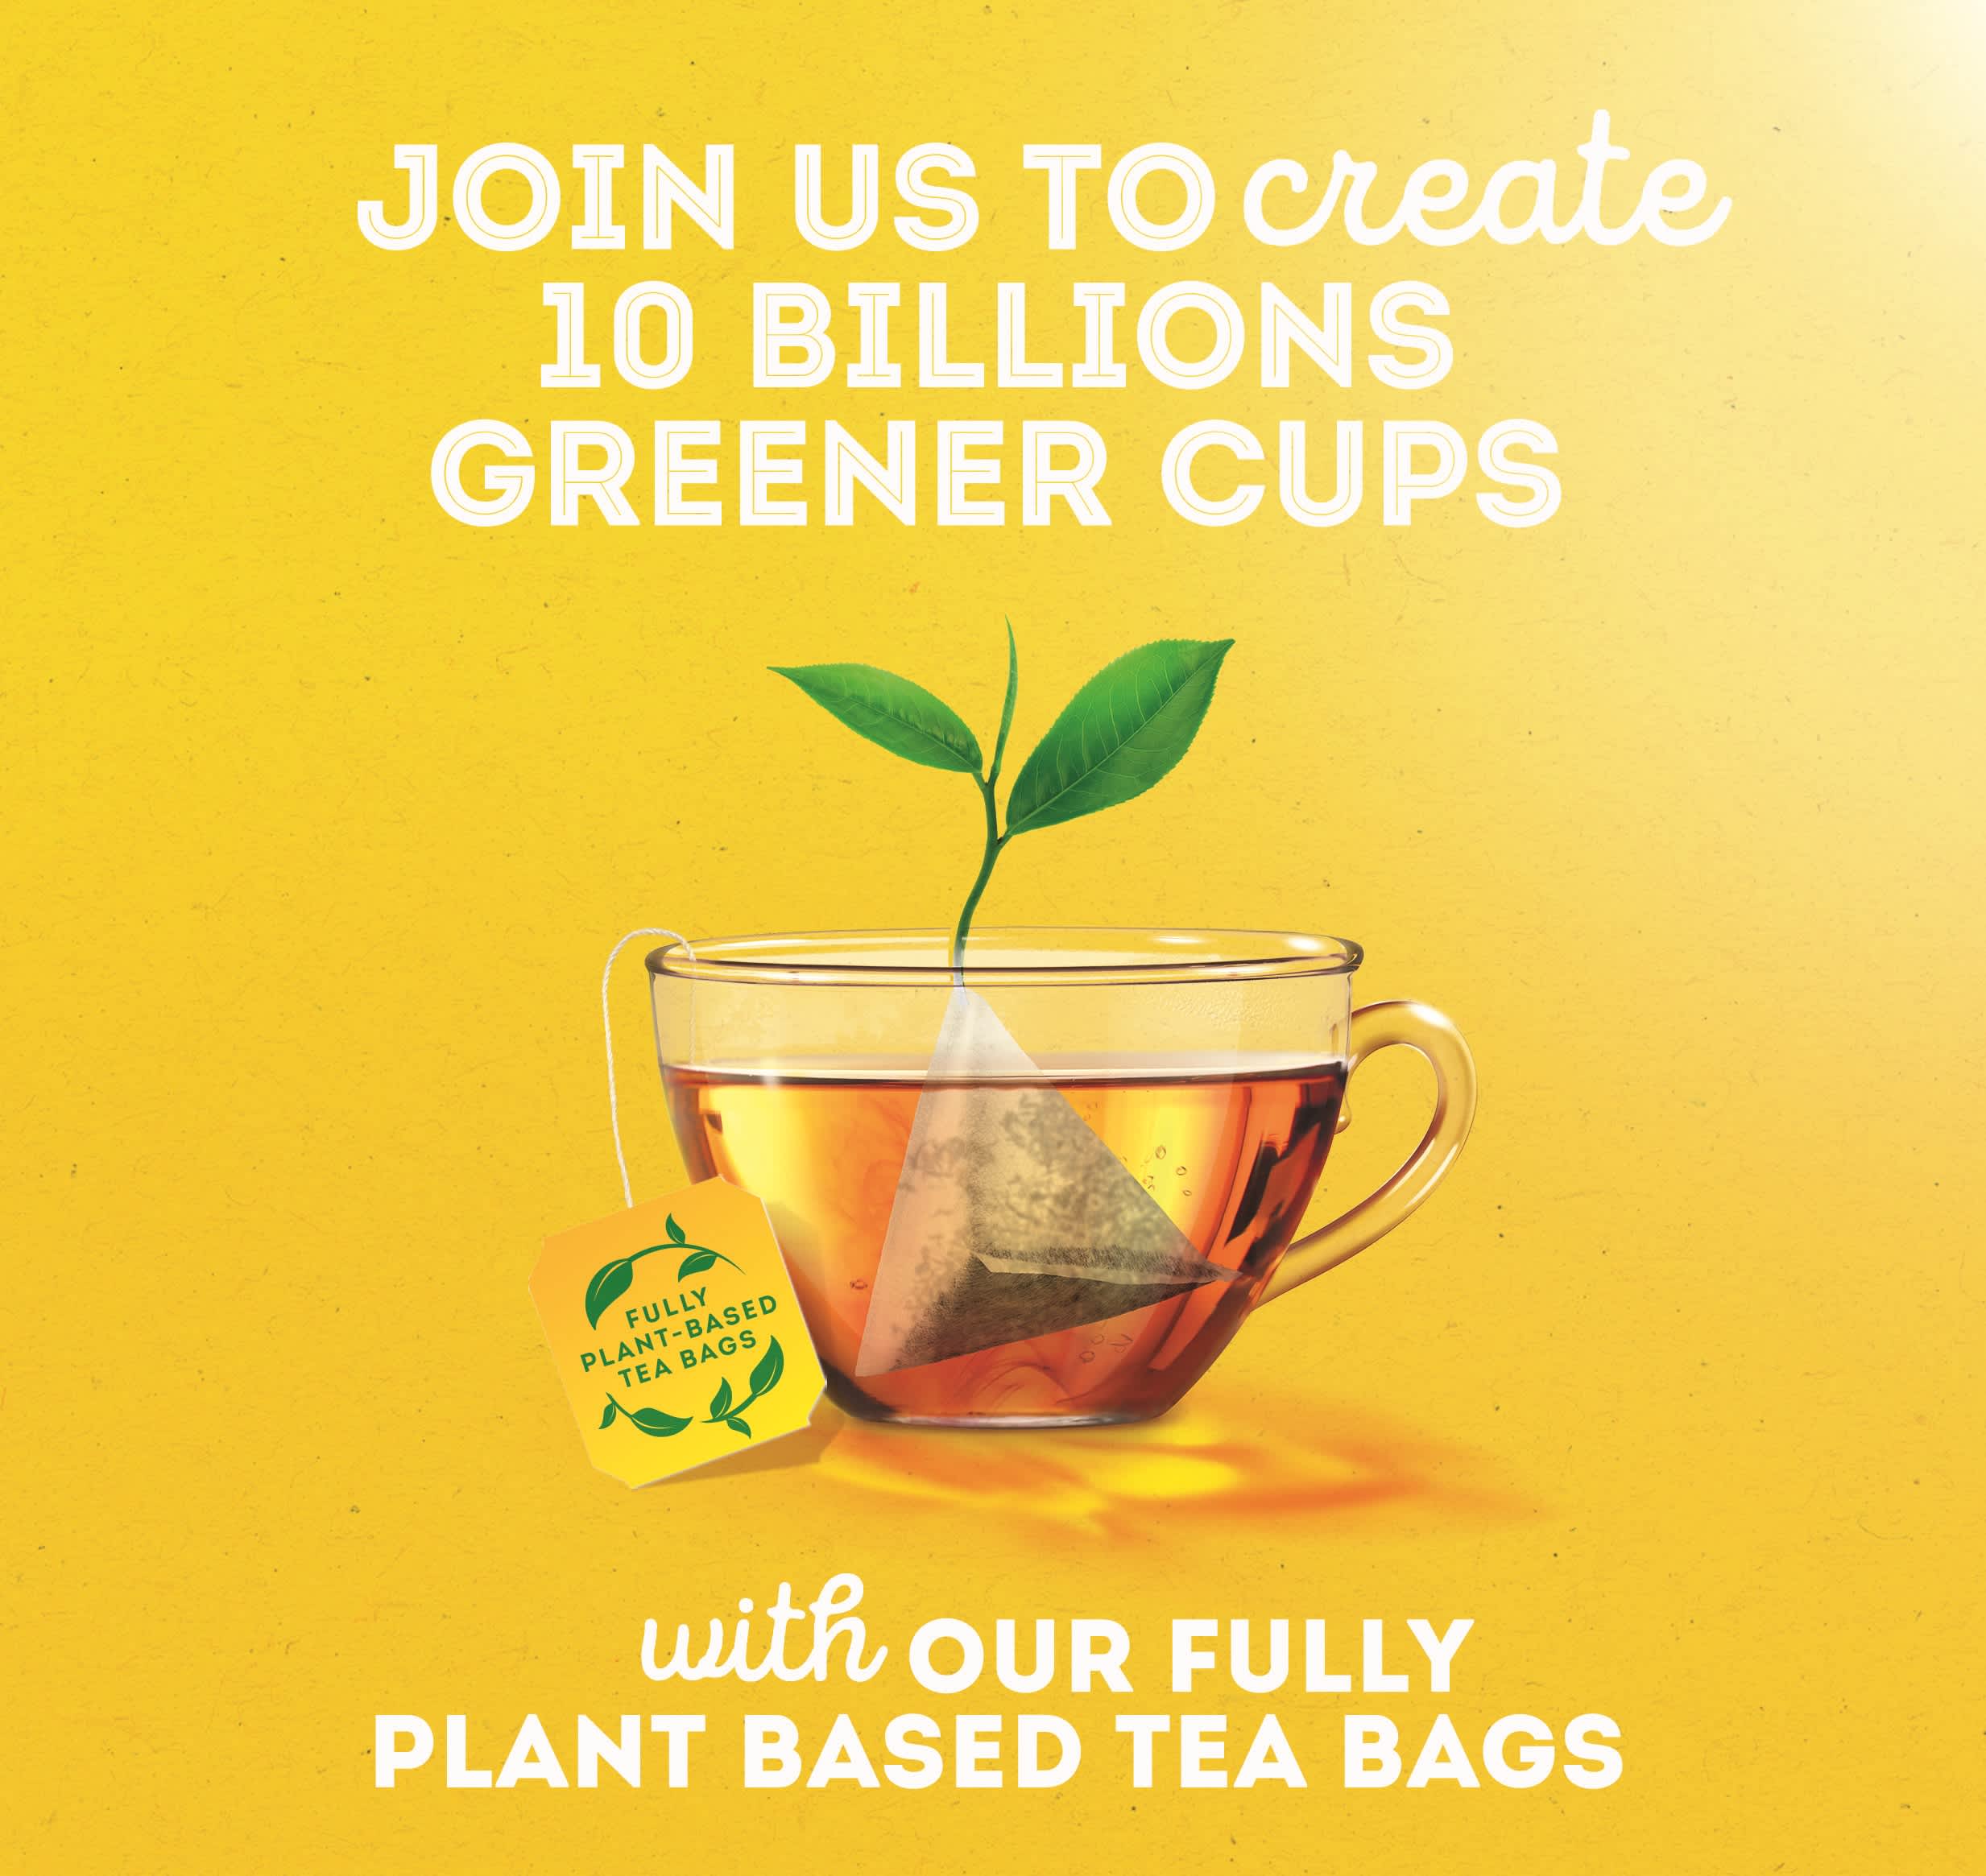 LIPTON – NOW FULLY PLANT BASED